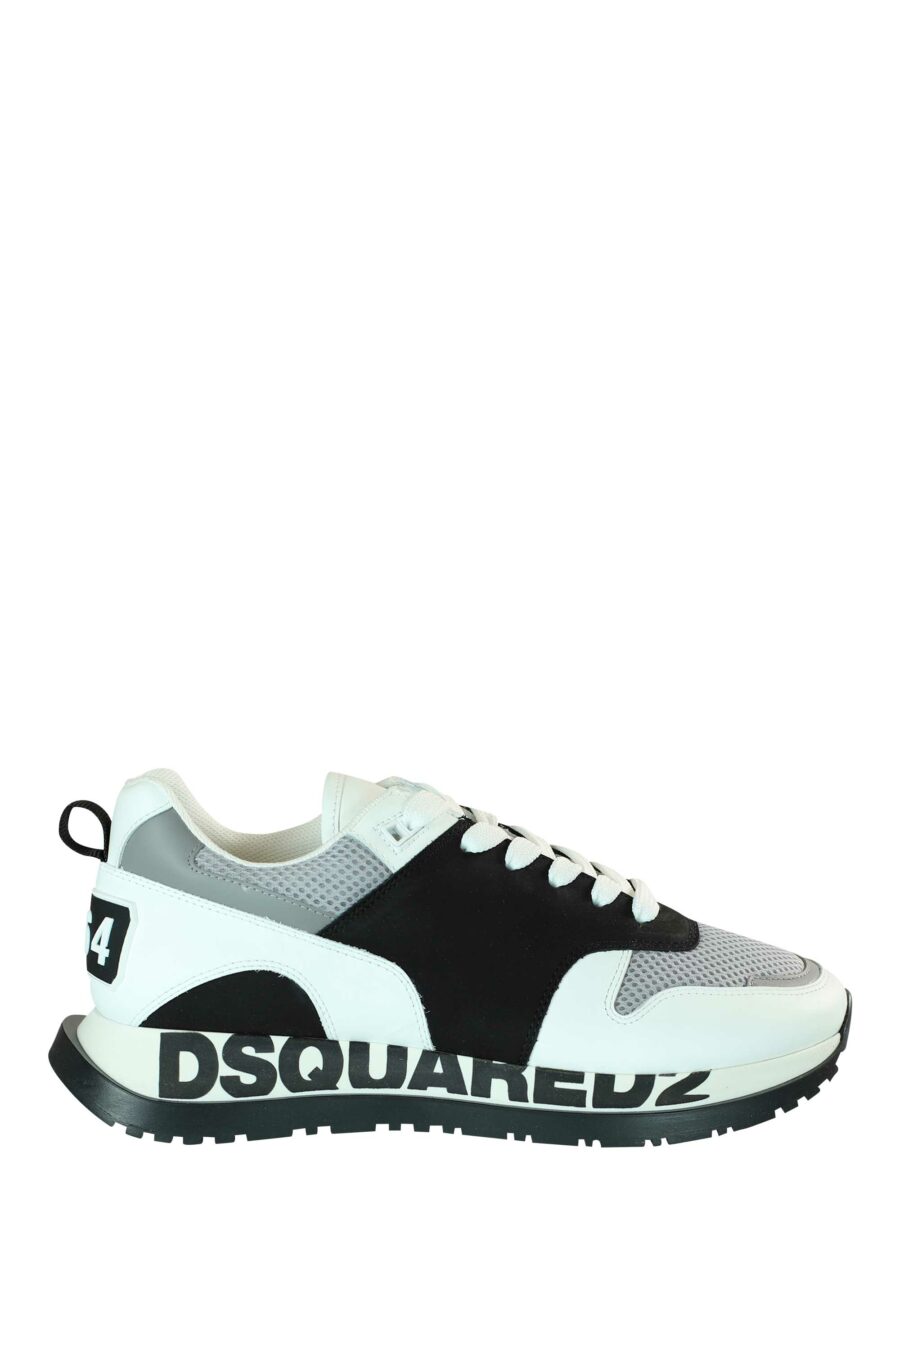 Black mixed running shoes with logo on sole - 8055777205655